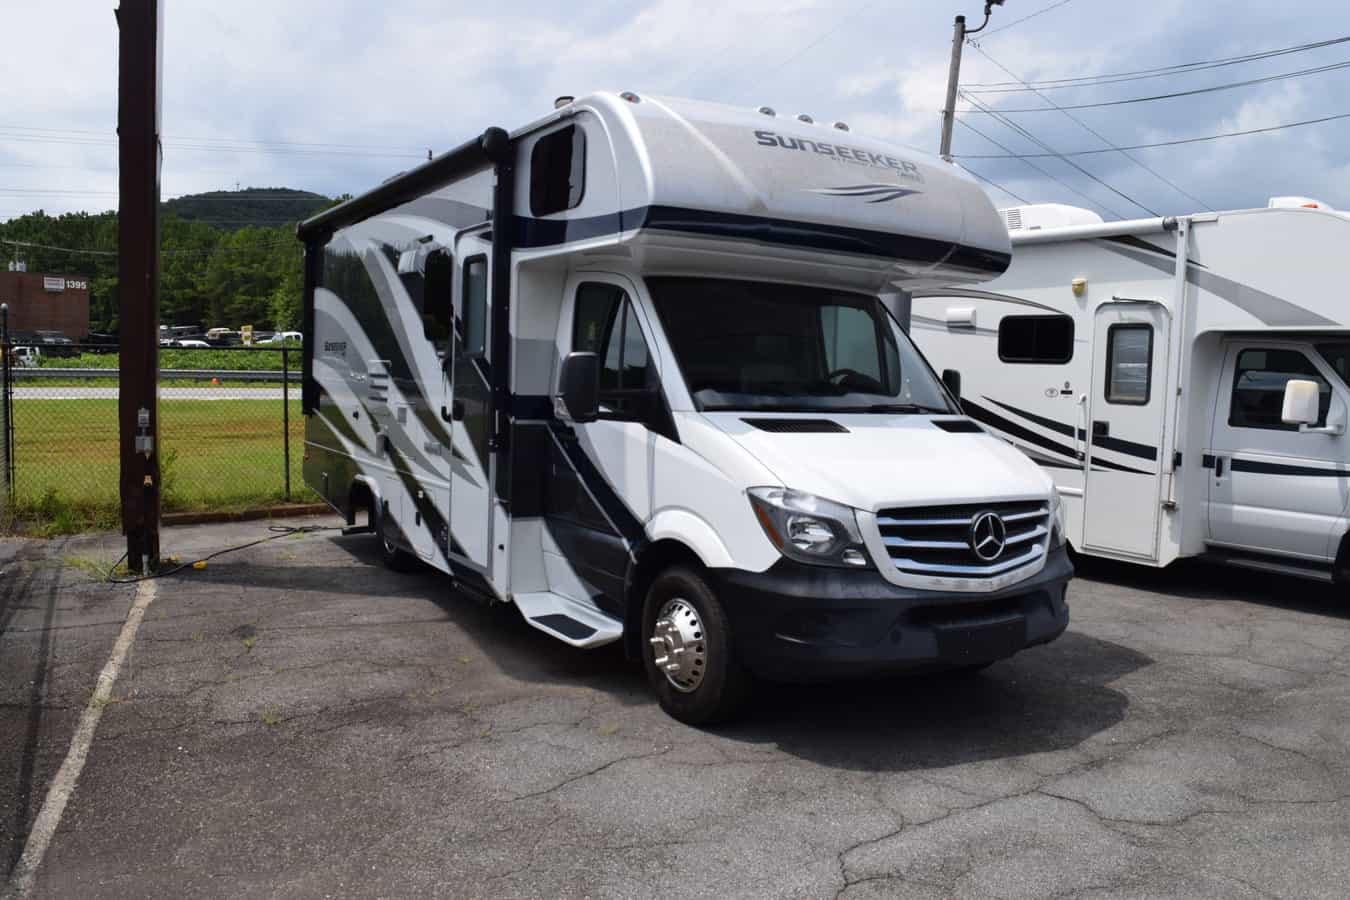 USED 2018 Forest River SUNSEEKER 2400WB